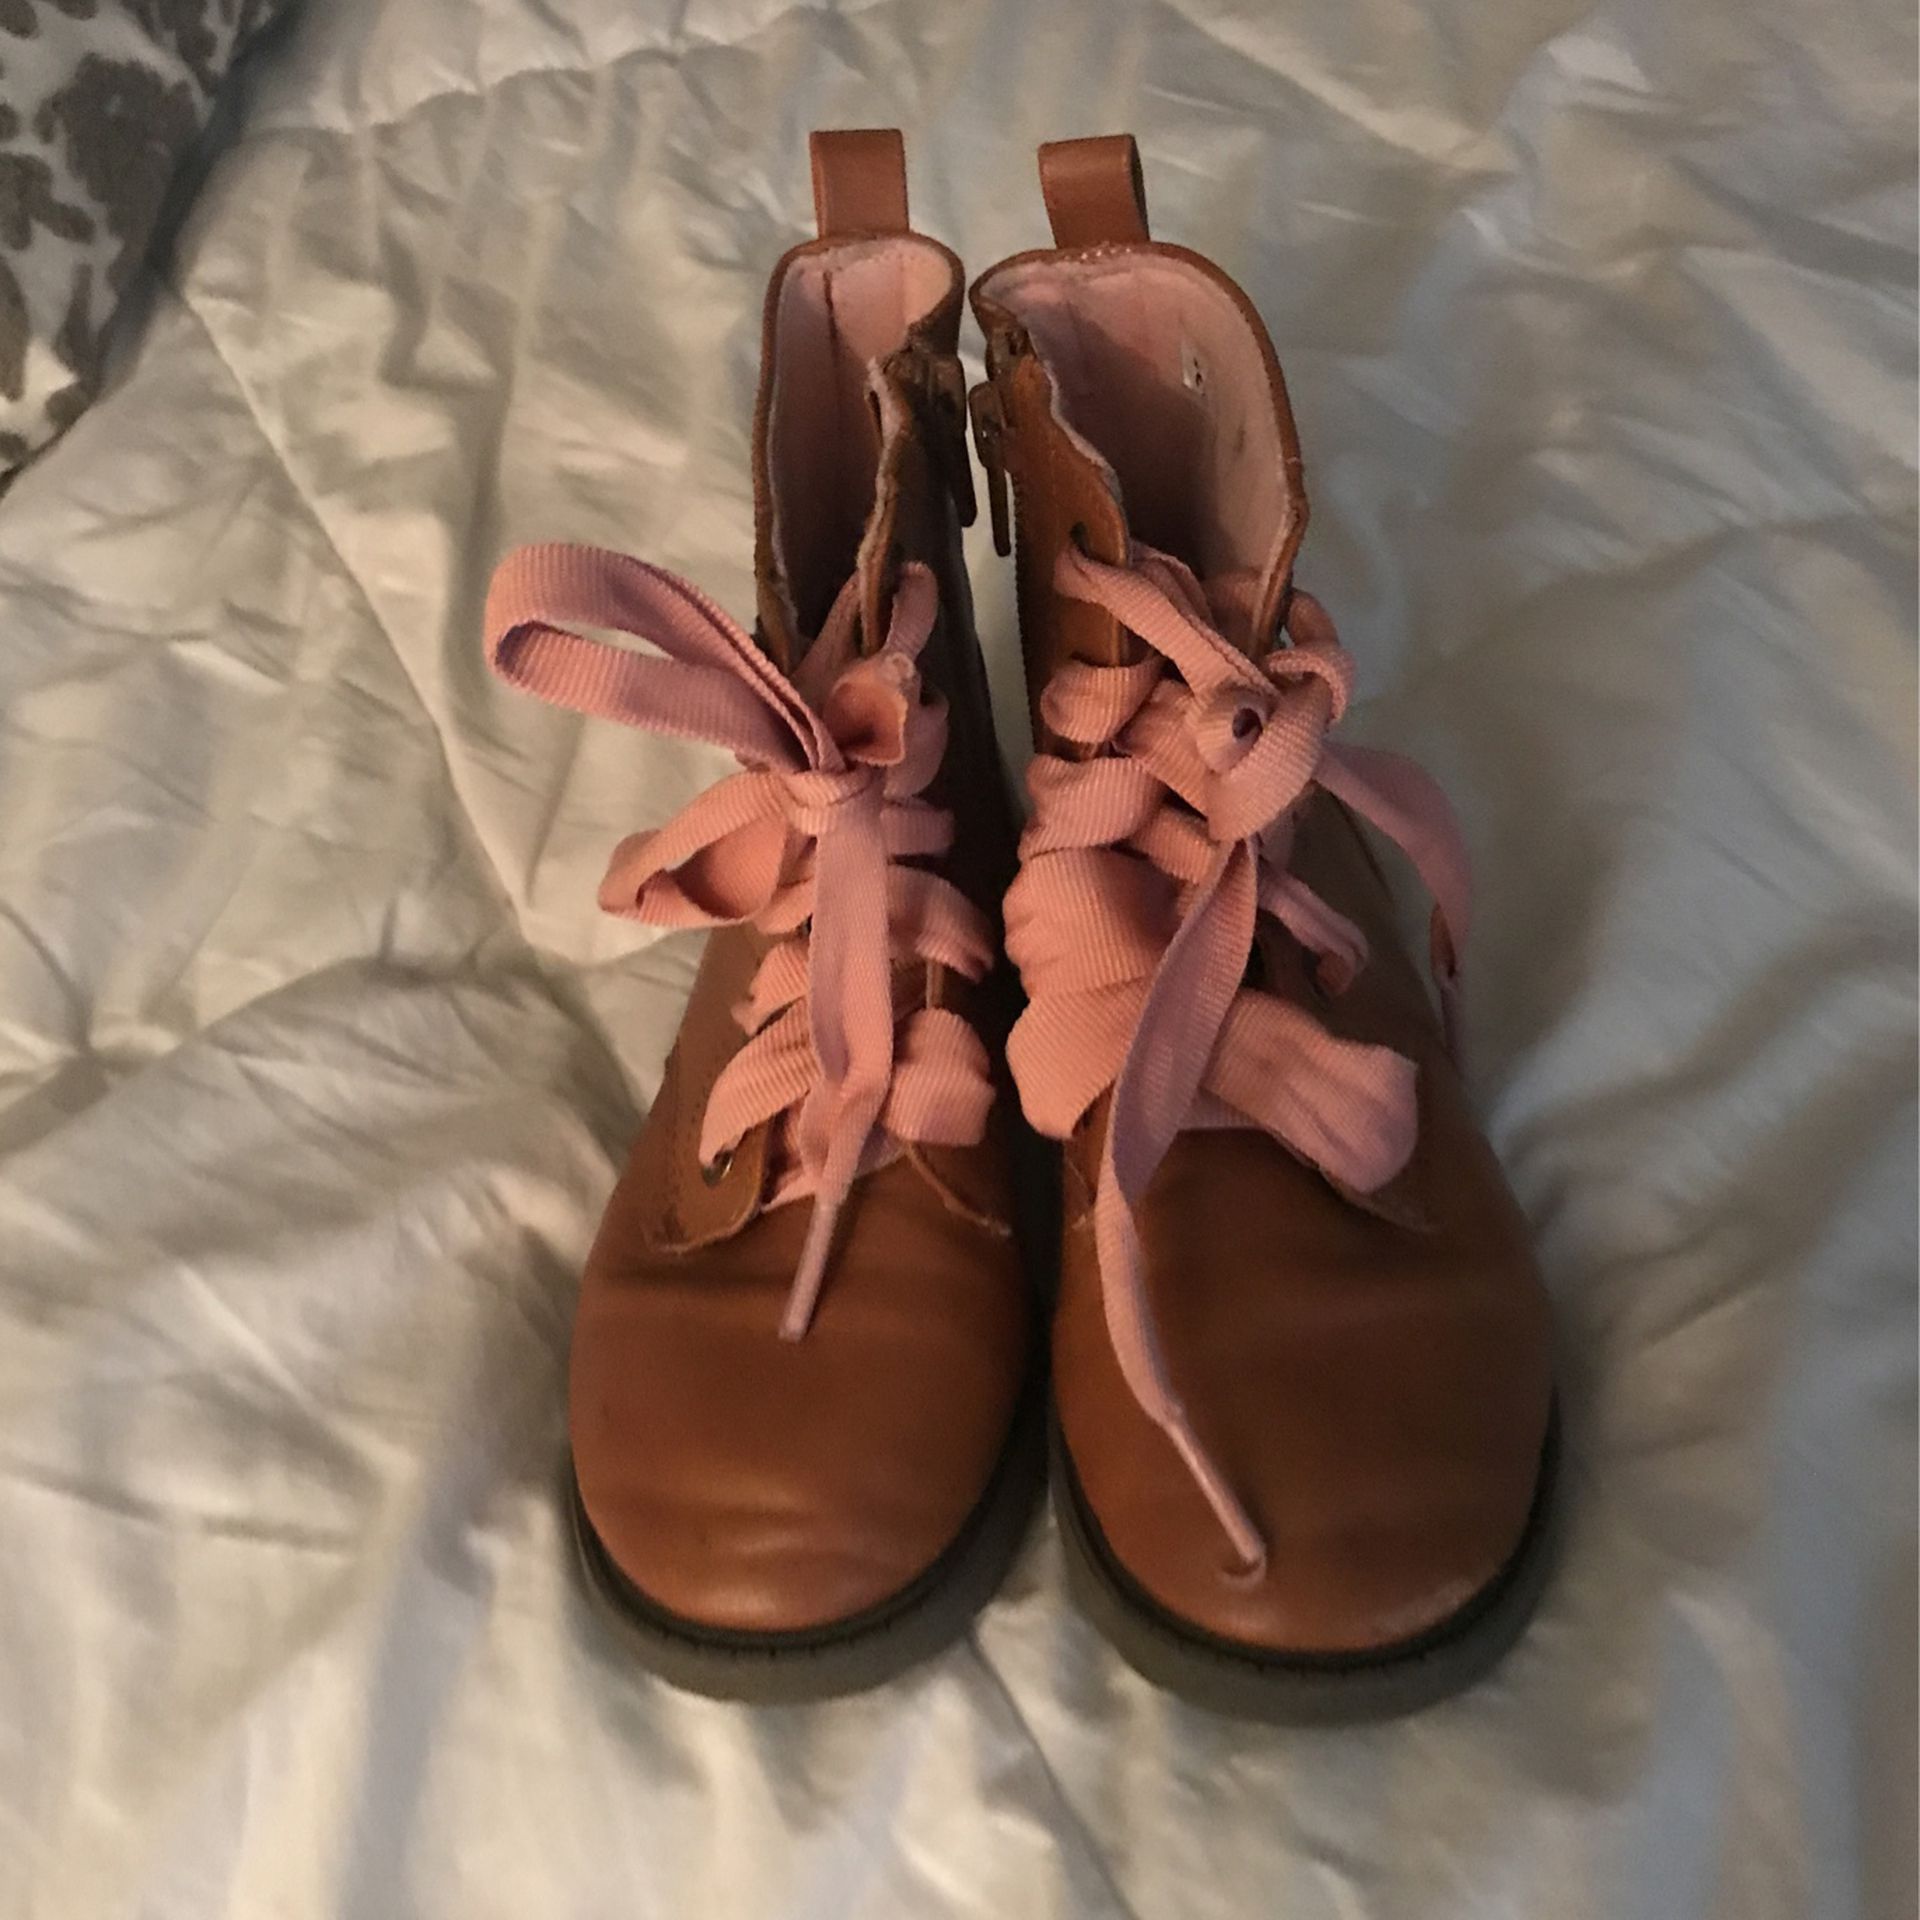 Size 13 Girls Leather Light Brown Boots  